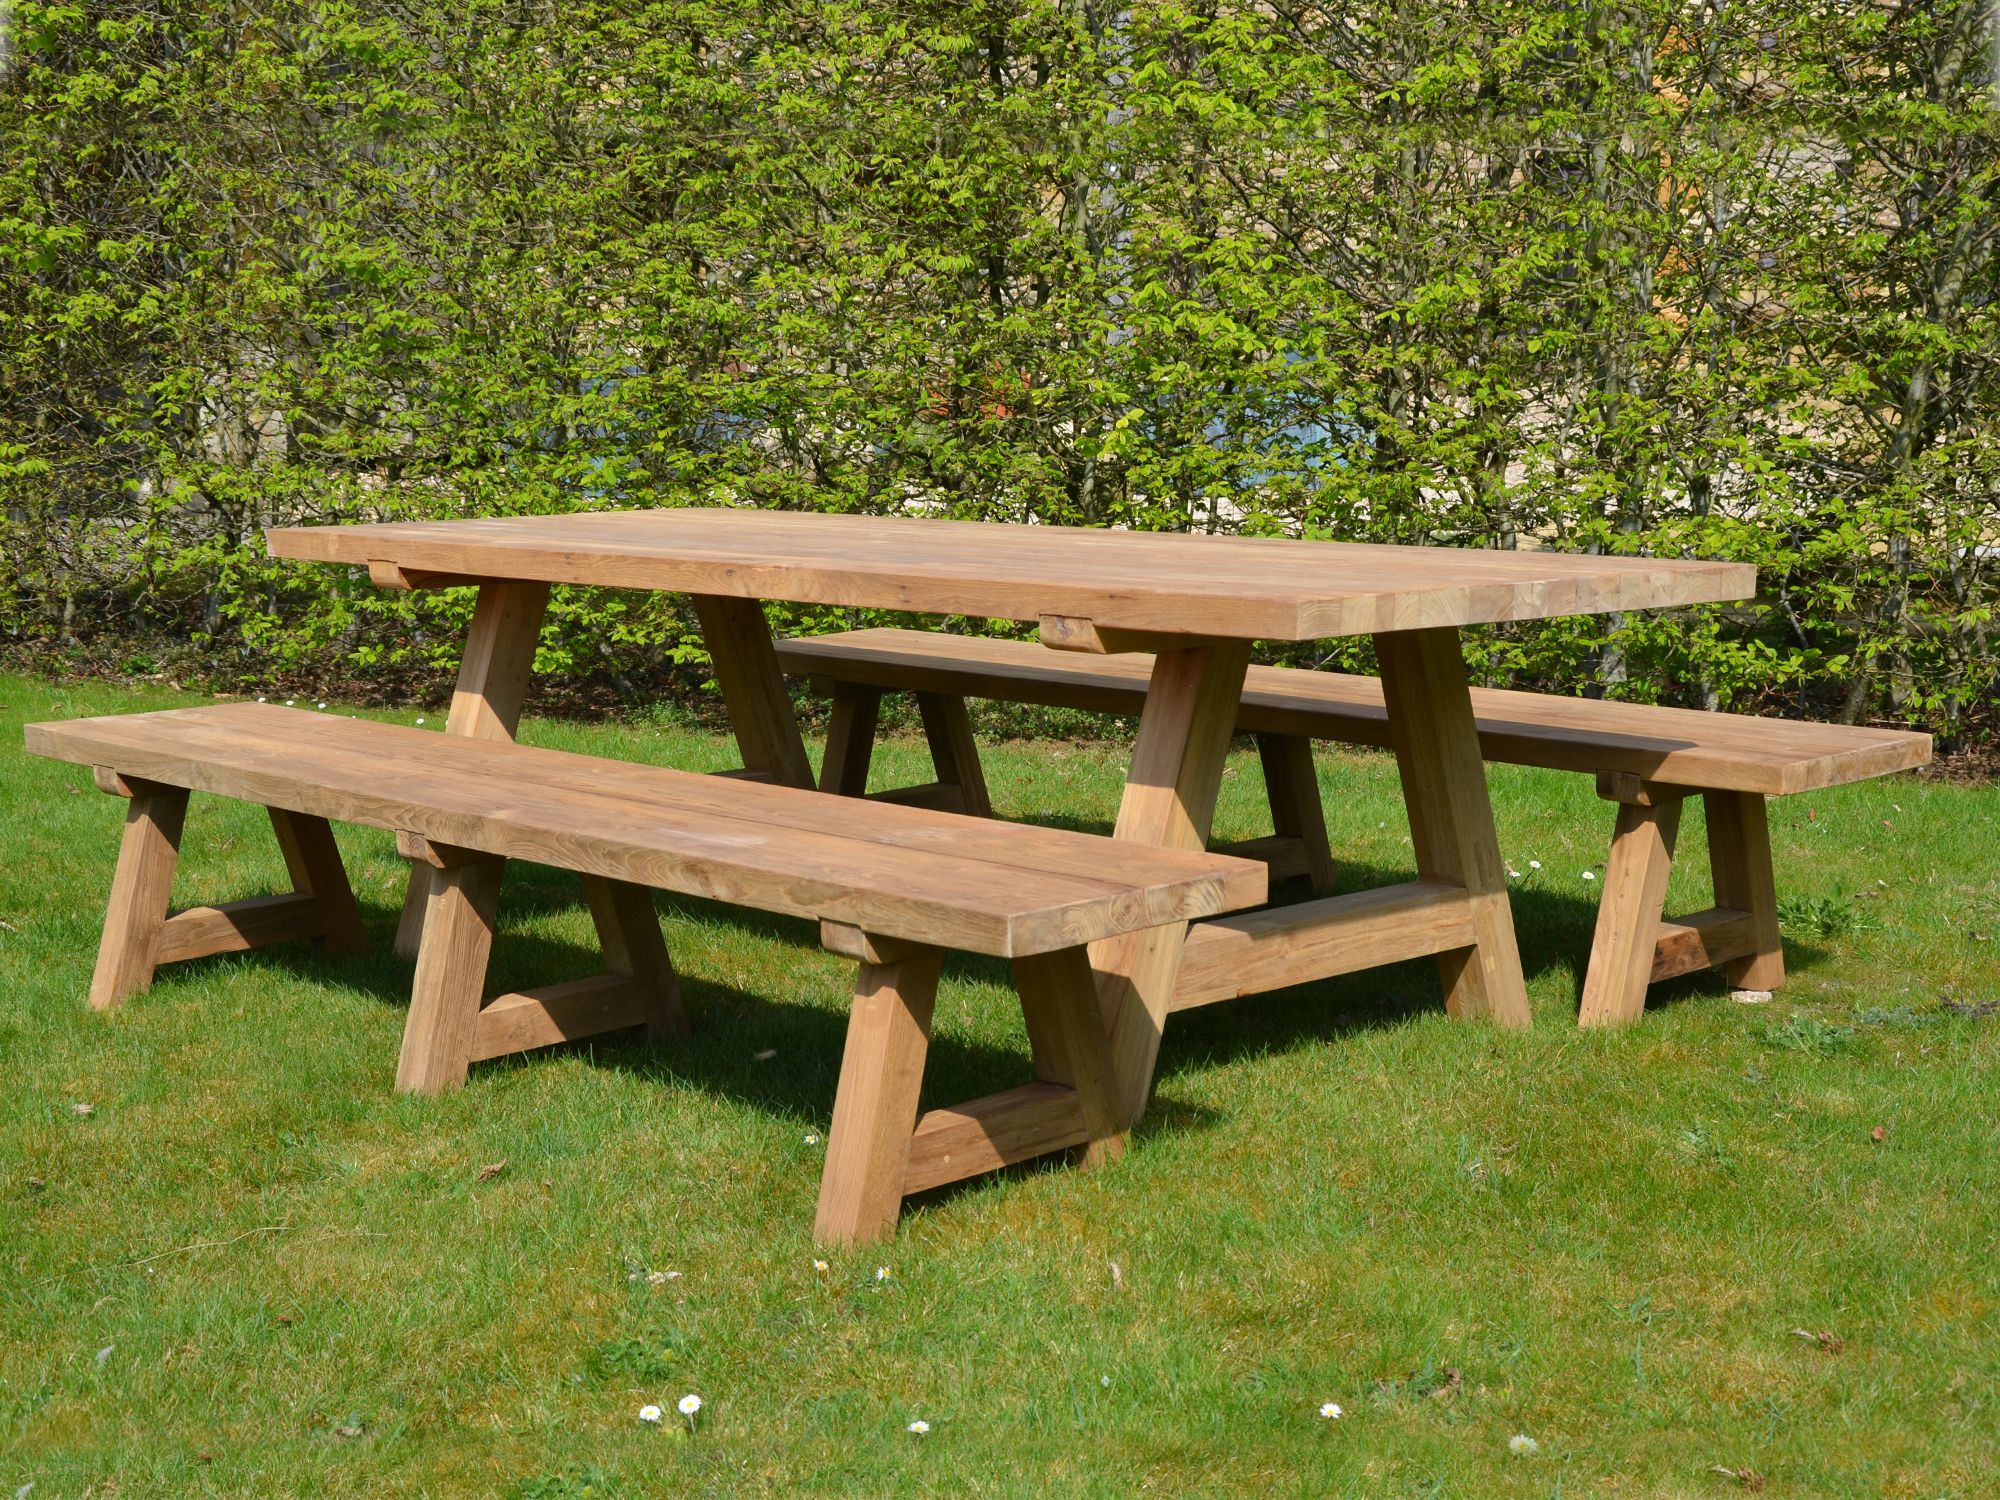 The Wooden Garden Table and Benches Set - ARCHITECTURAL HERITAGE